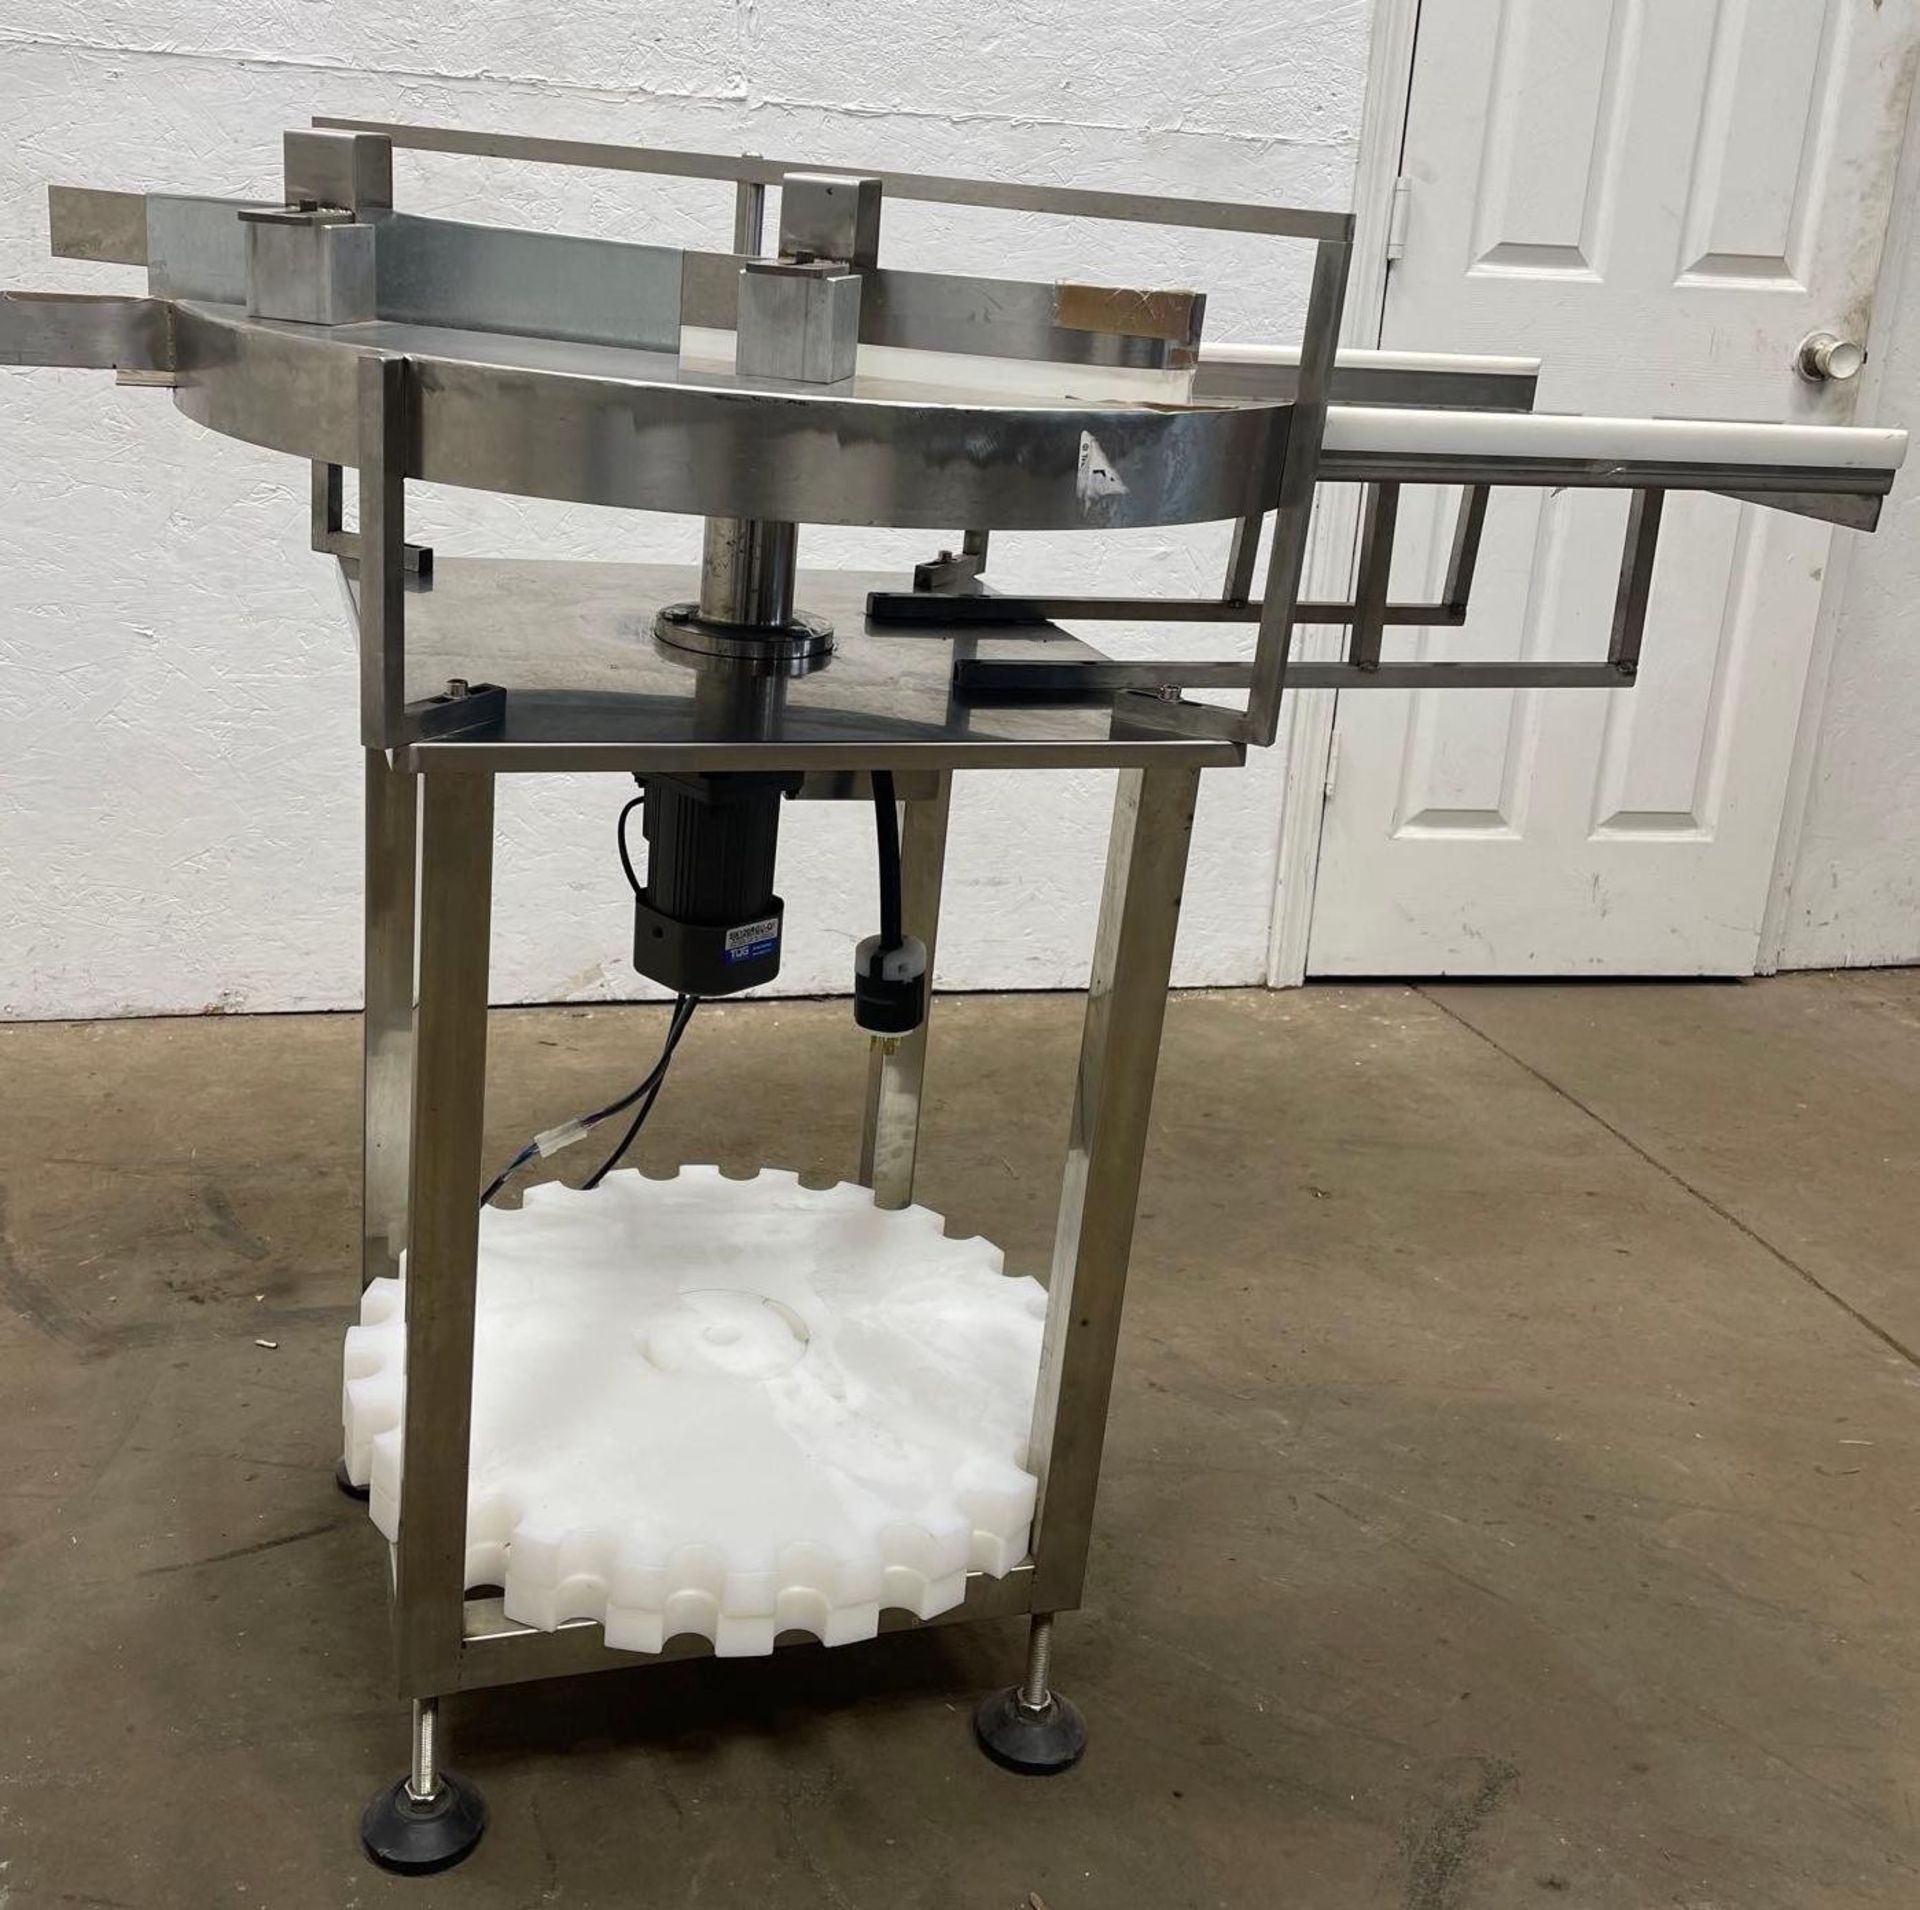 Stainless Steel Unscrambler Station, Approx Dims: 43 x 30 x 43, ($25 Basic Lift & Load, $100 to - Bild 4 aus 9